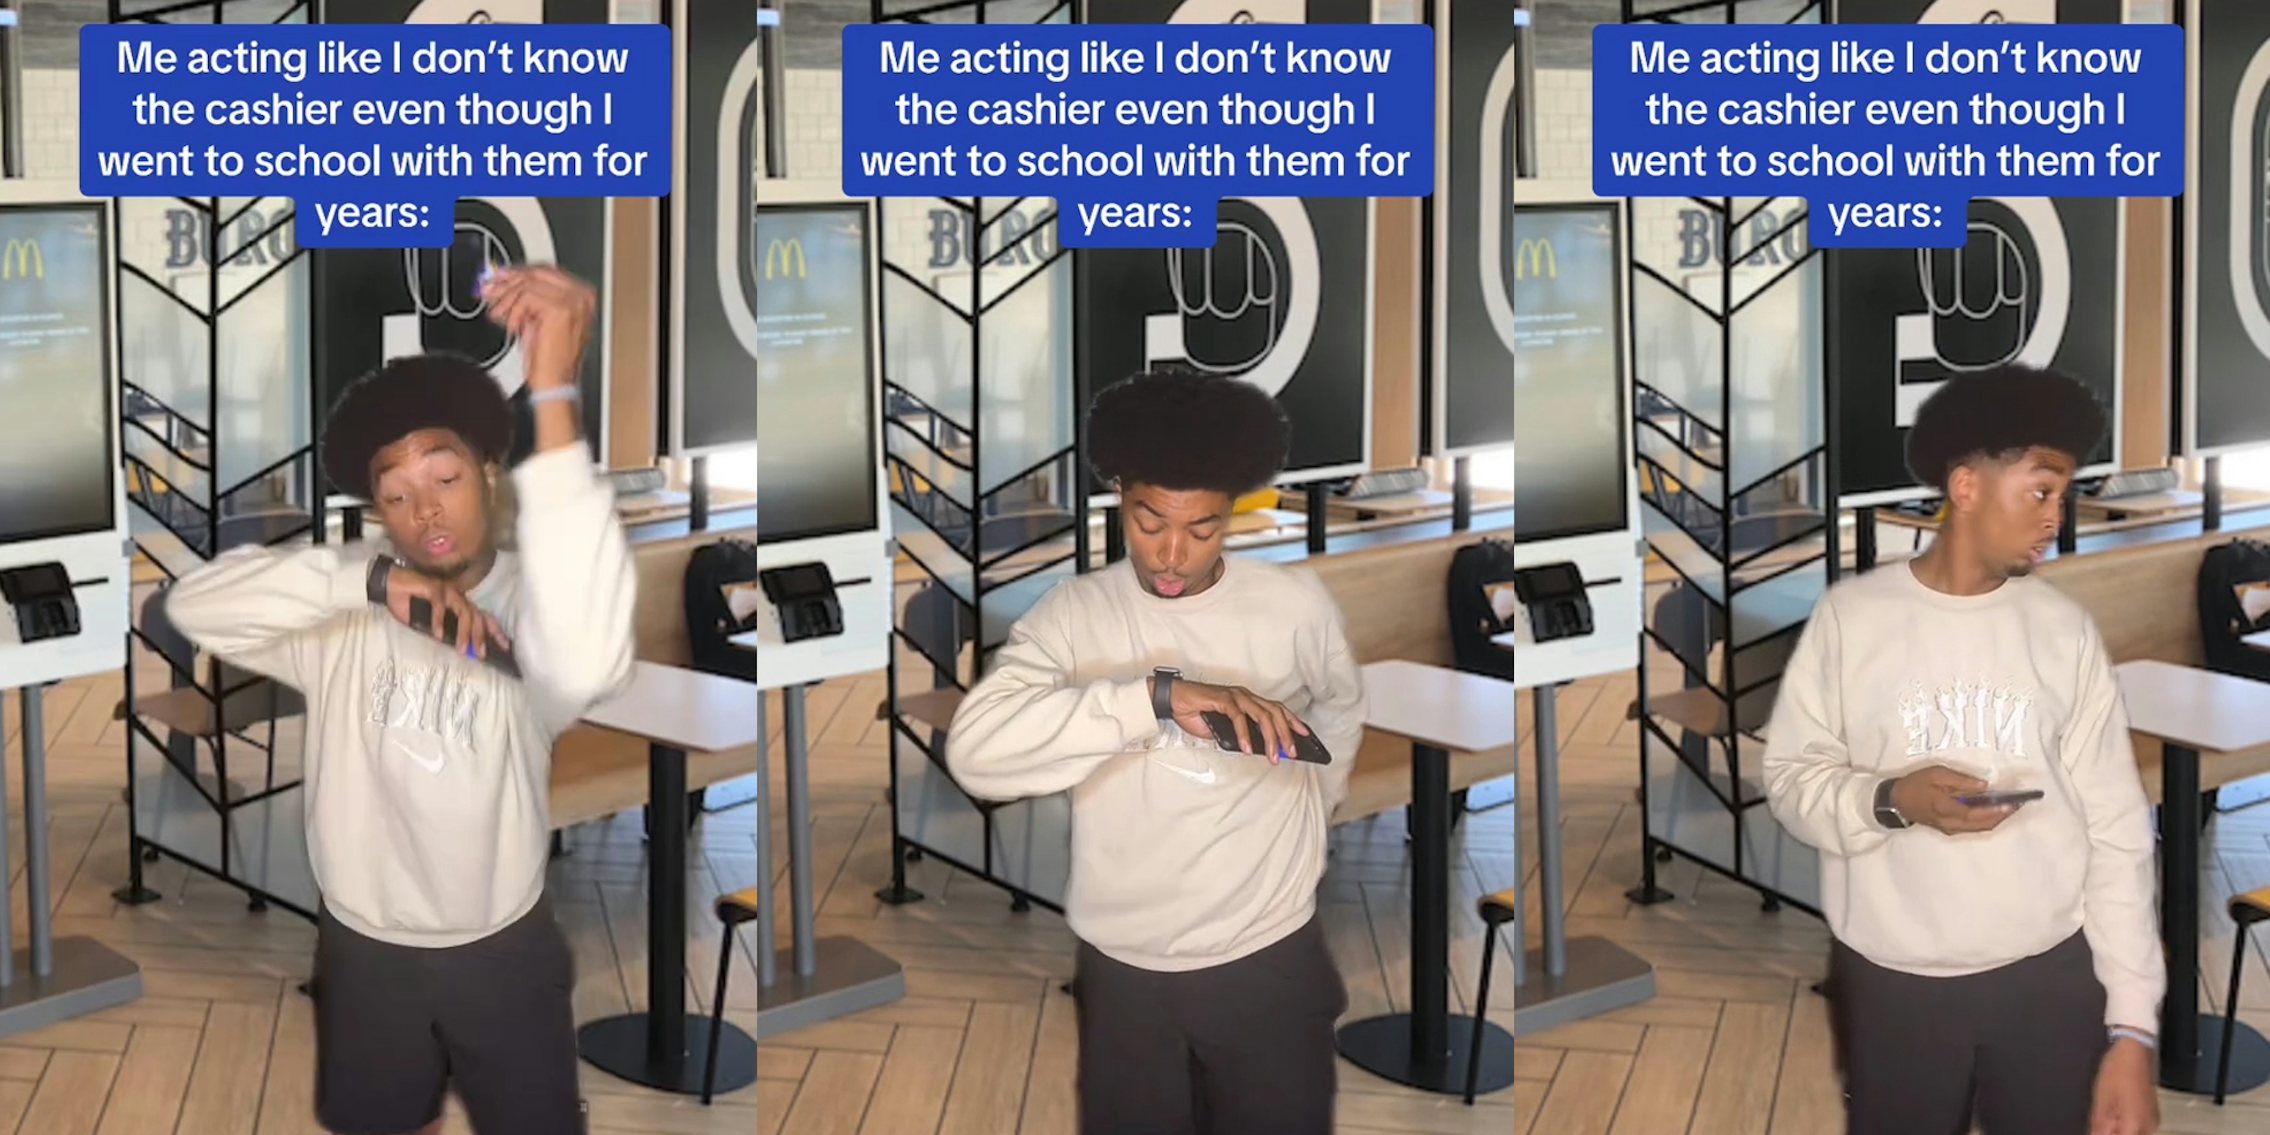 customer greenscreen TikTok over McDonald's checkout background with caption 'Me acting like I don't know the cashier even tho I went to school with them for years:' (l) customer greenscreen TikTok over McDonald's checkout background with caption 'Me acting like I don't know the cashier even tho I went to school with them for years:' (c) customer greenscreen TikTok over McDonald's checkout background with caption 'Me acting like I don't know the cashier even tho I went to school with them for years:' (r)